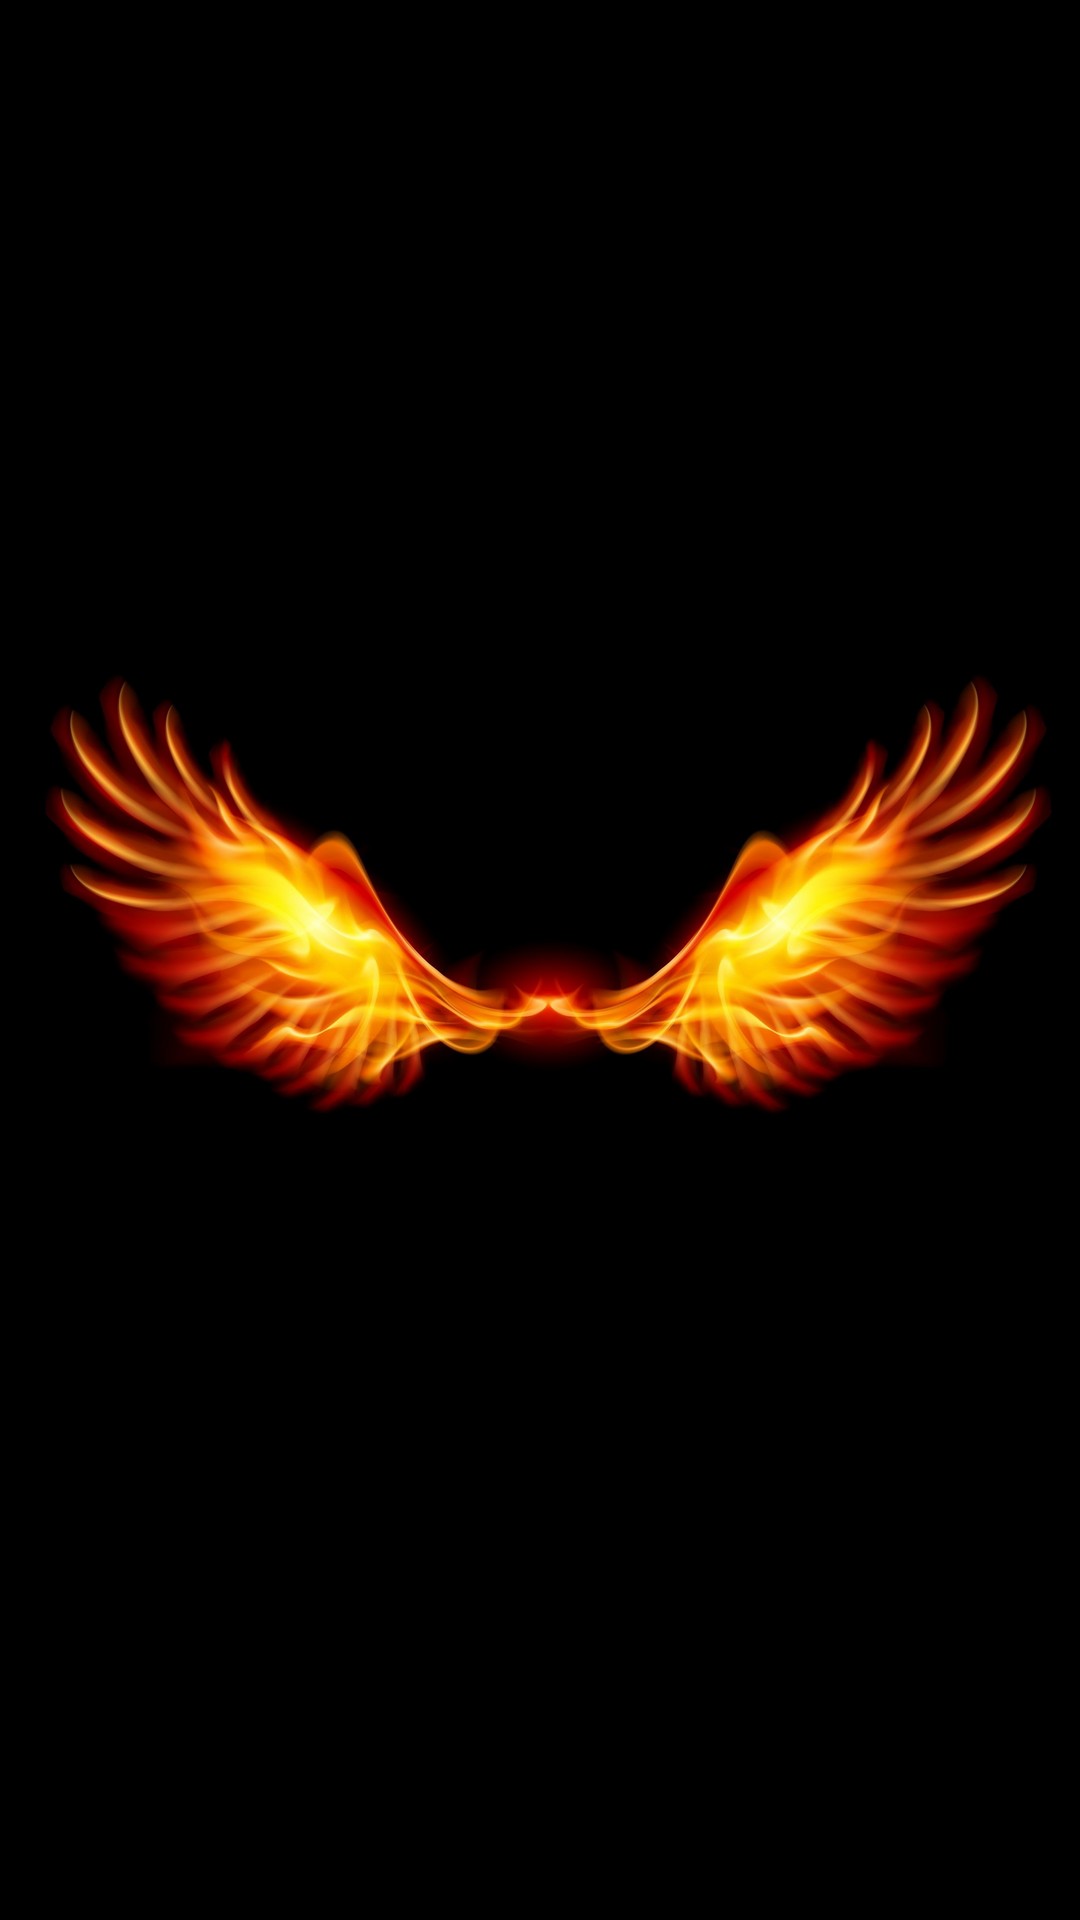 iPhone 7 Wallpaper Phoenix Images with resolution 1080X1920 pixel. You can make this wallpaper for your iPhone 5, 6, 7, 8, X backgrounds, Mobile Screensaver, or iPad Lock Screen